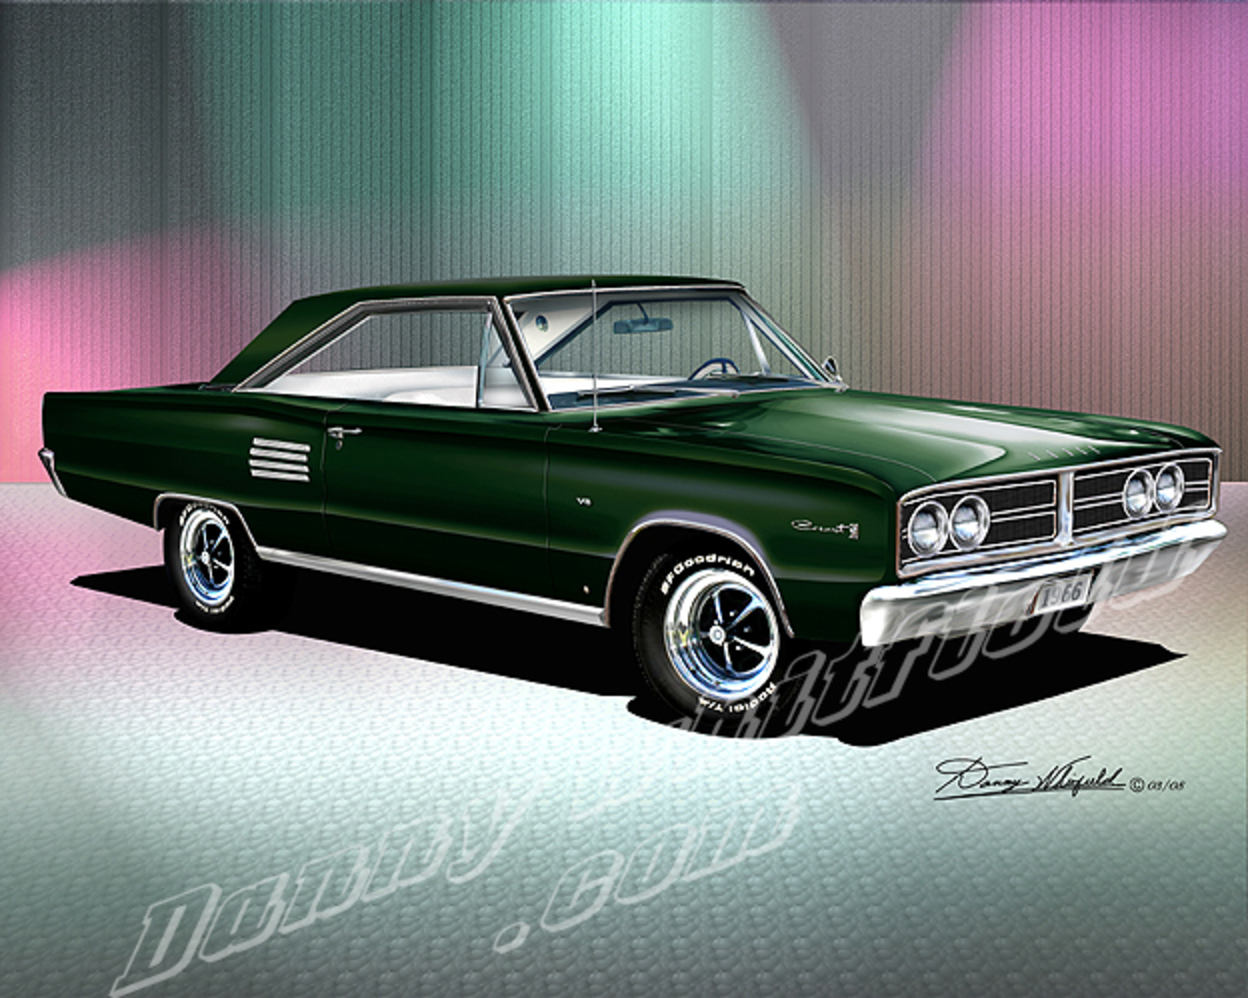 1966-1967 Dodge Coronet Classic Cars Prints by Danny Whitfield